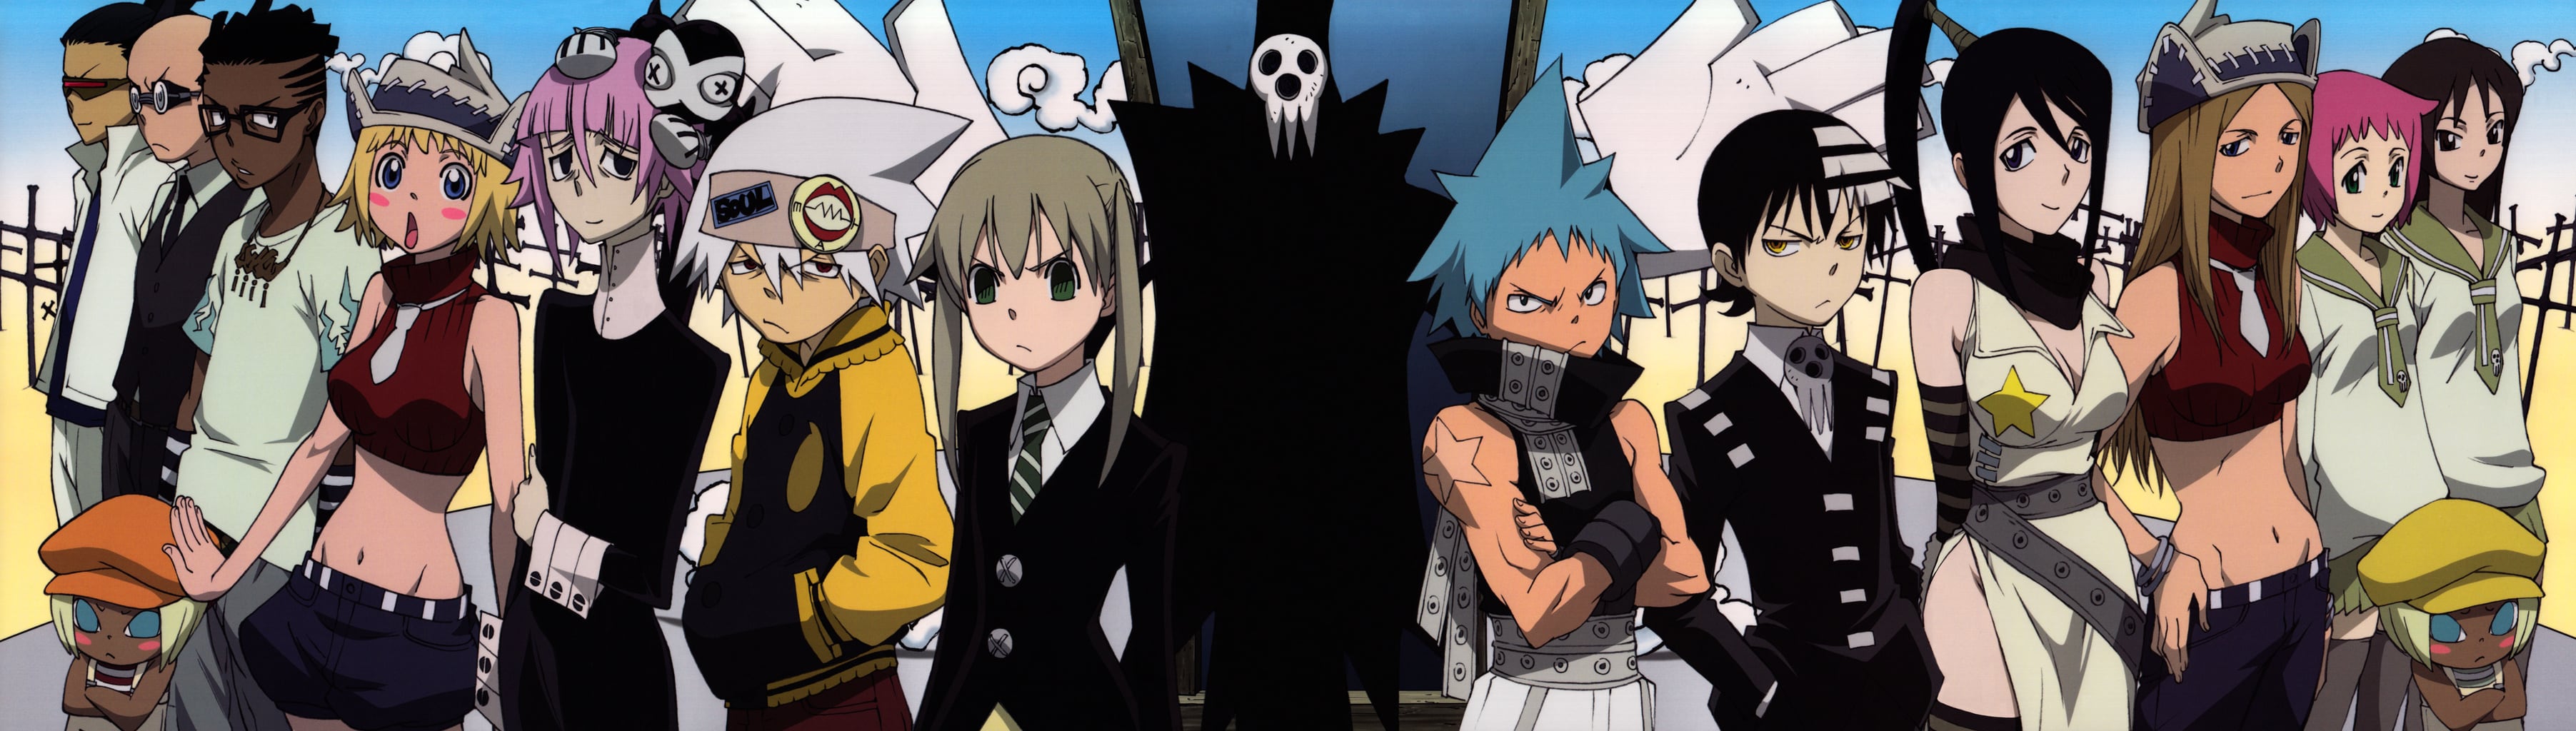 10 Characters That Deserve A Better Storyline In Soul Eater